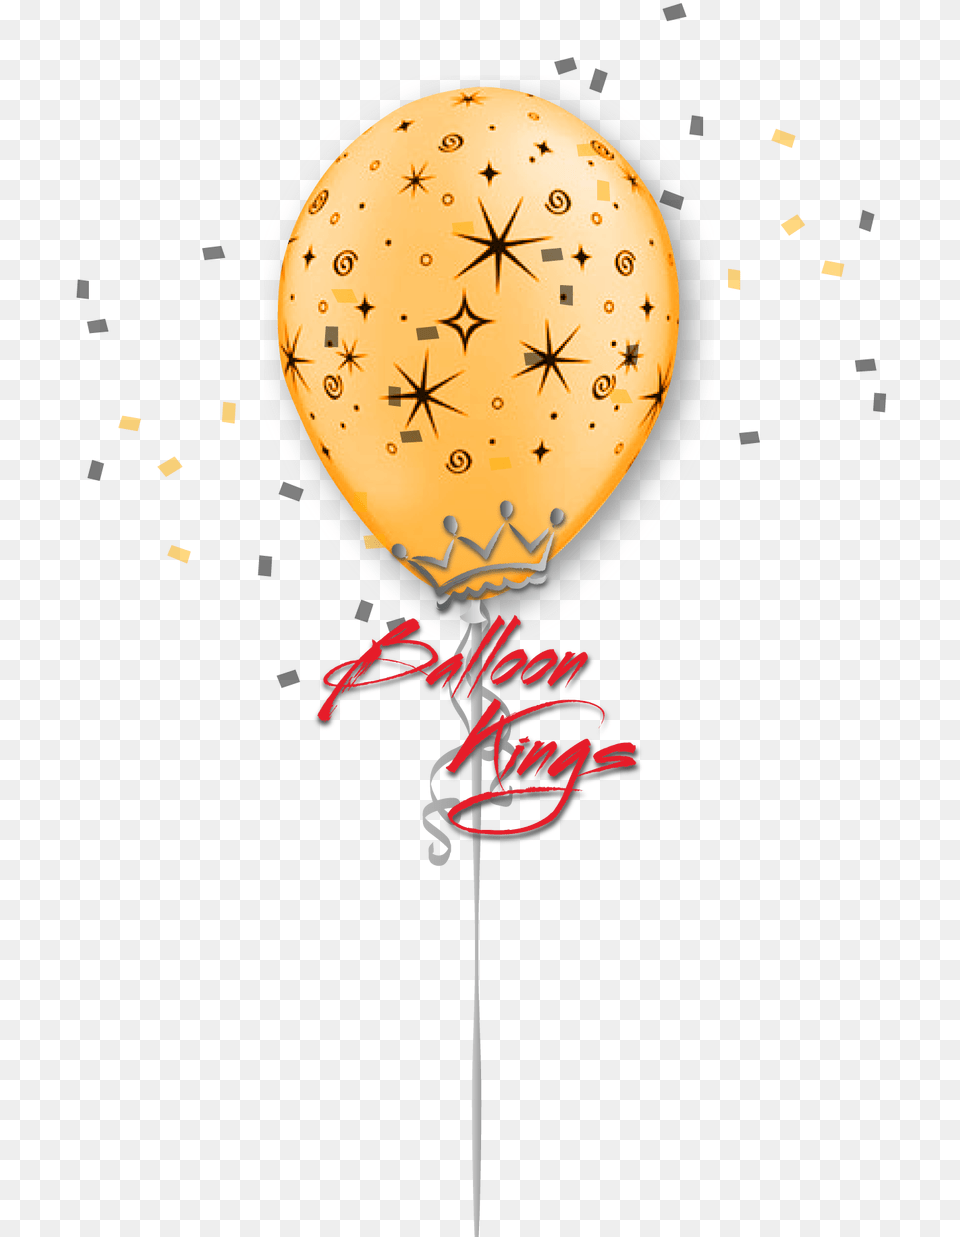 Sparkles Gold Full Hd Background For Picsart, Balloon Png